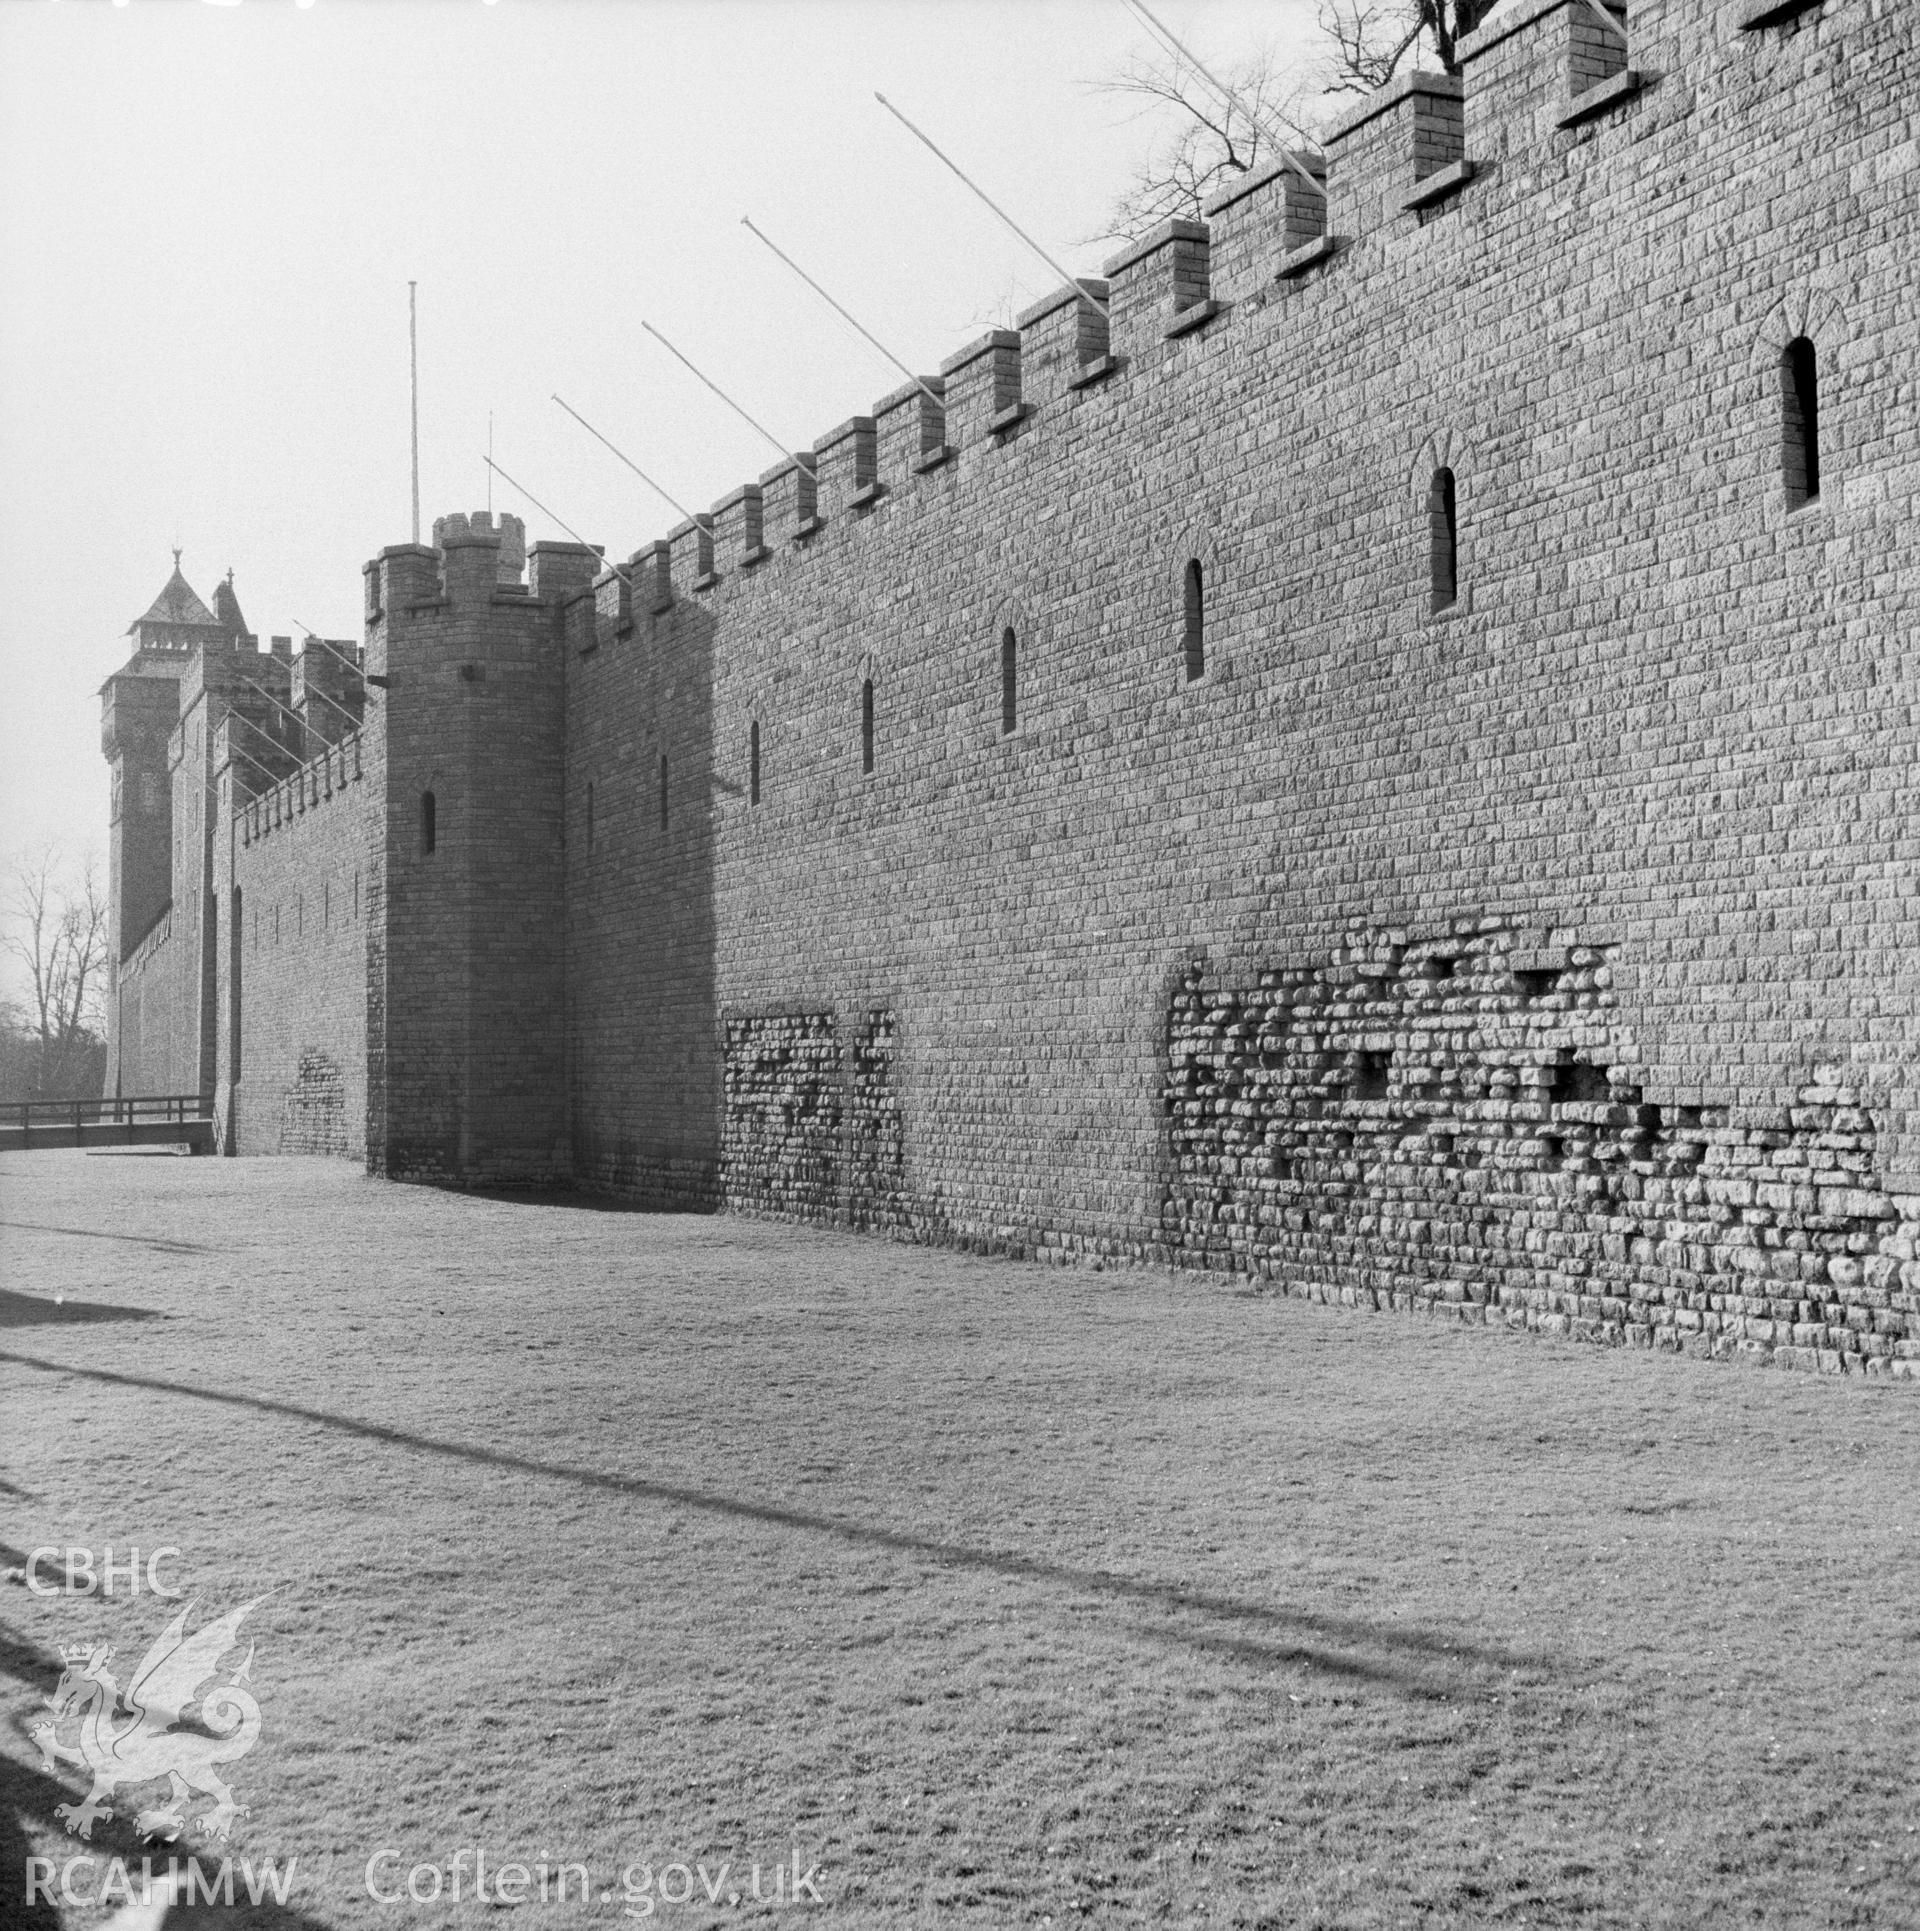 Digital copy of a black and white negative showing south wall of Cardiff Castle, taken 21st February 1966.